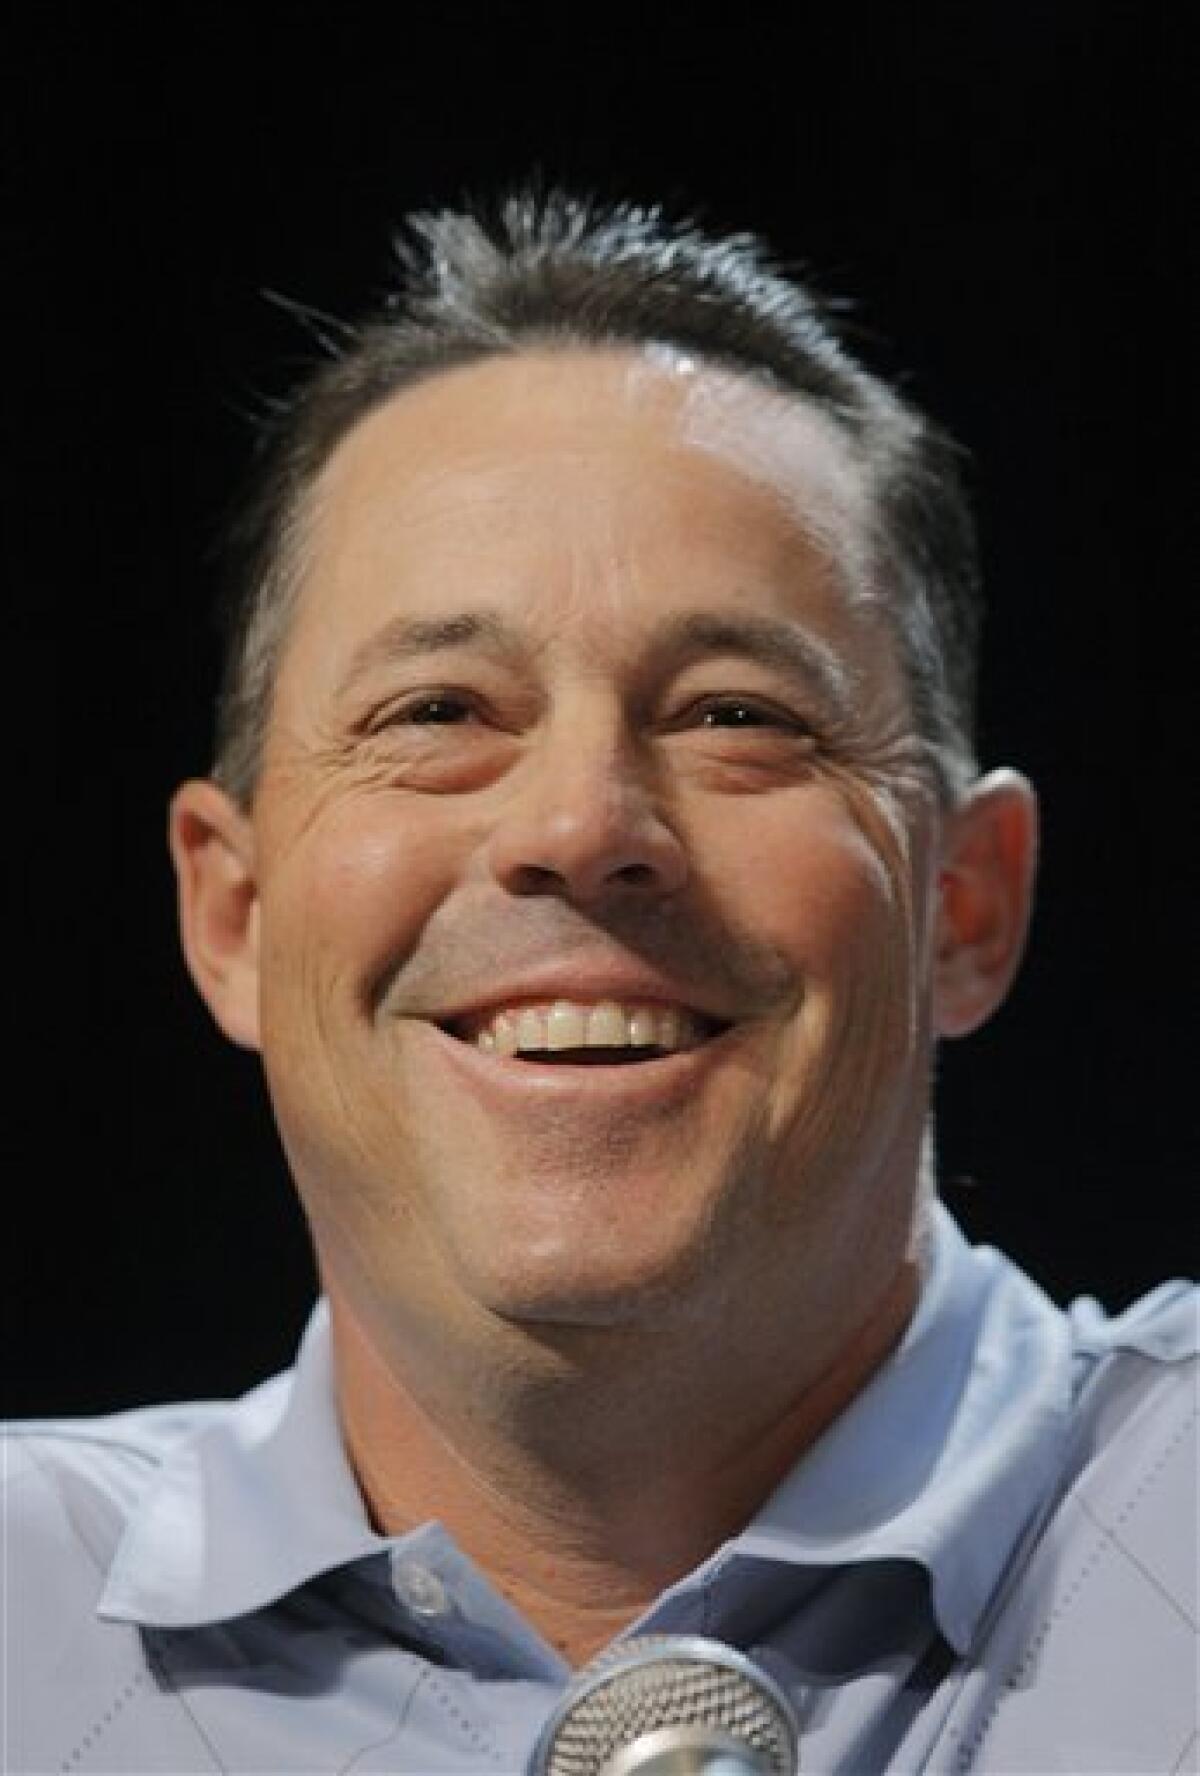 Complete game: Greg Maddux announces retirement - The San Diego